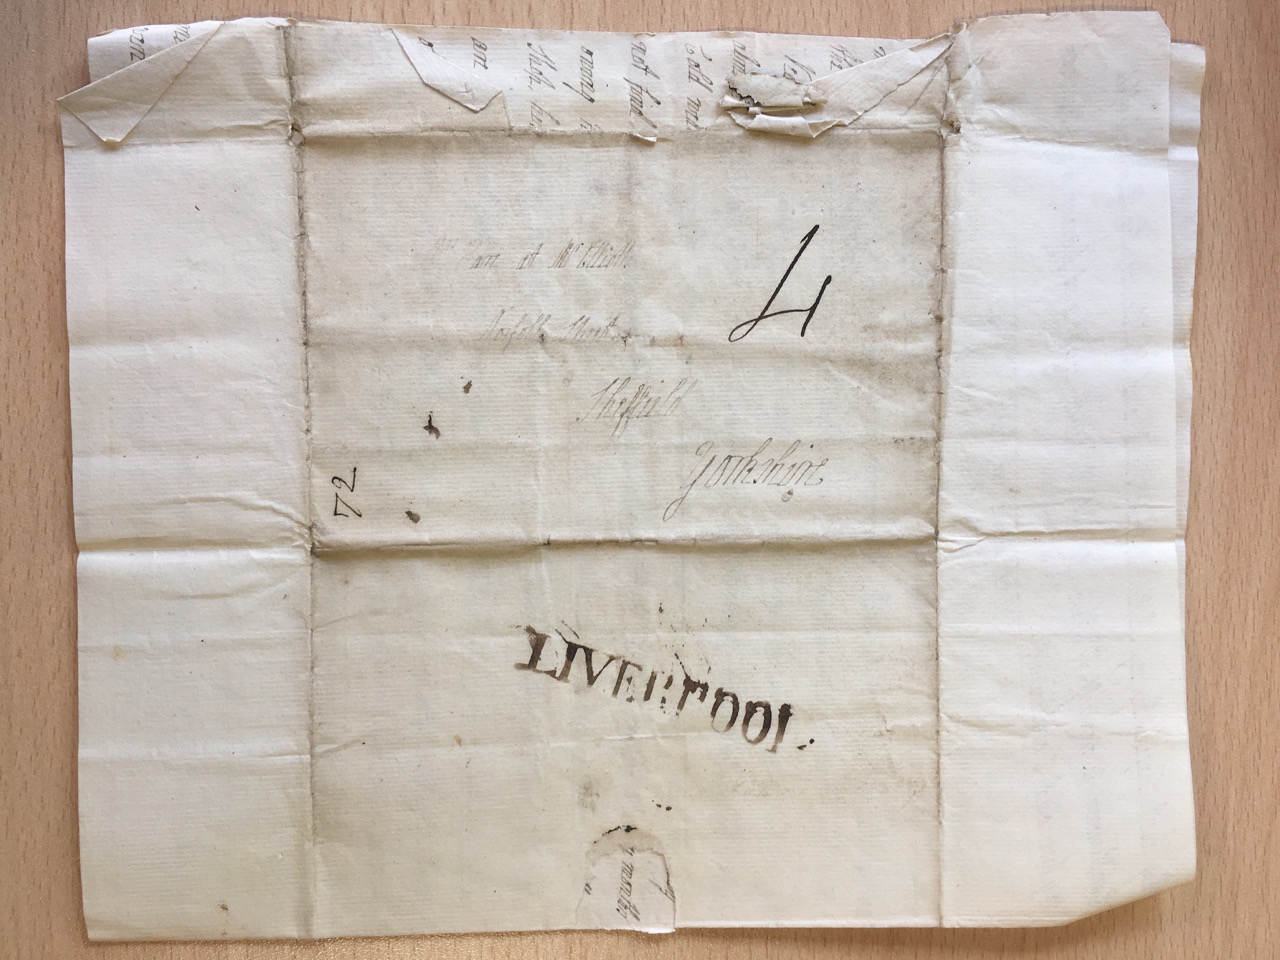 Image #4 of letter: J[enny] Brownsword to Ann Hare, 10 February 1772